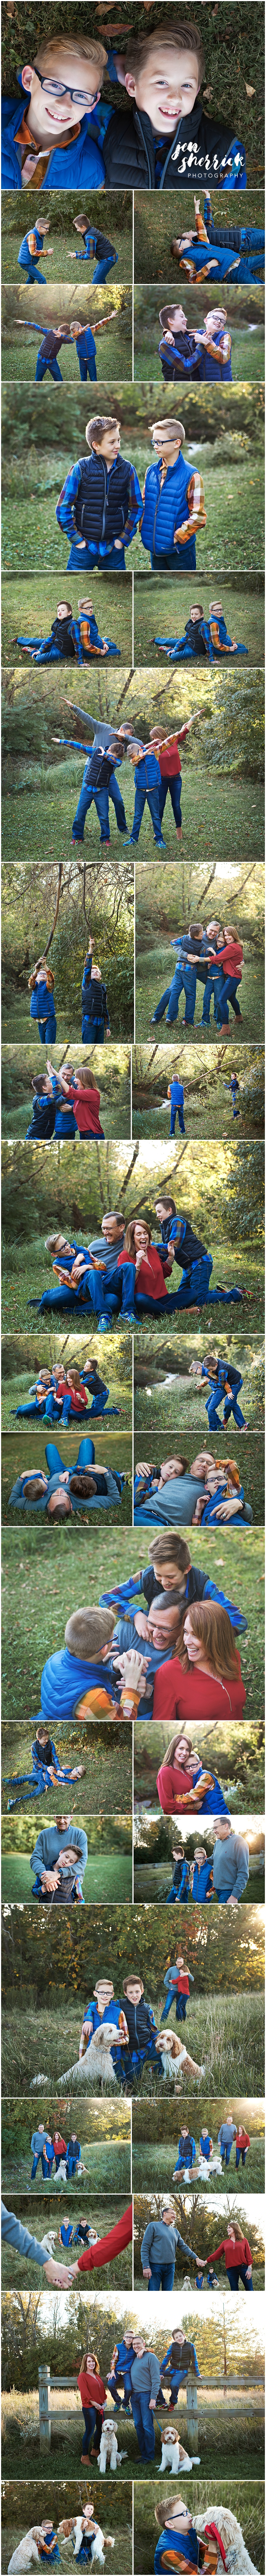 collage of family in nature continued